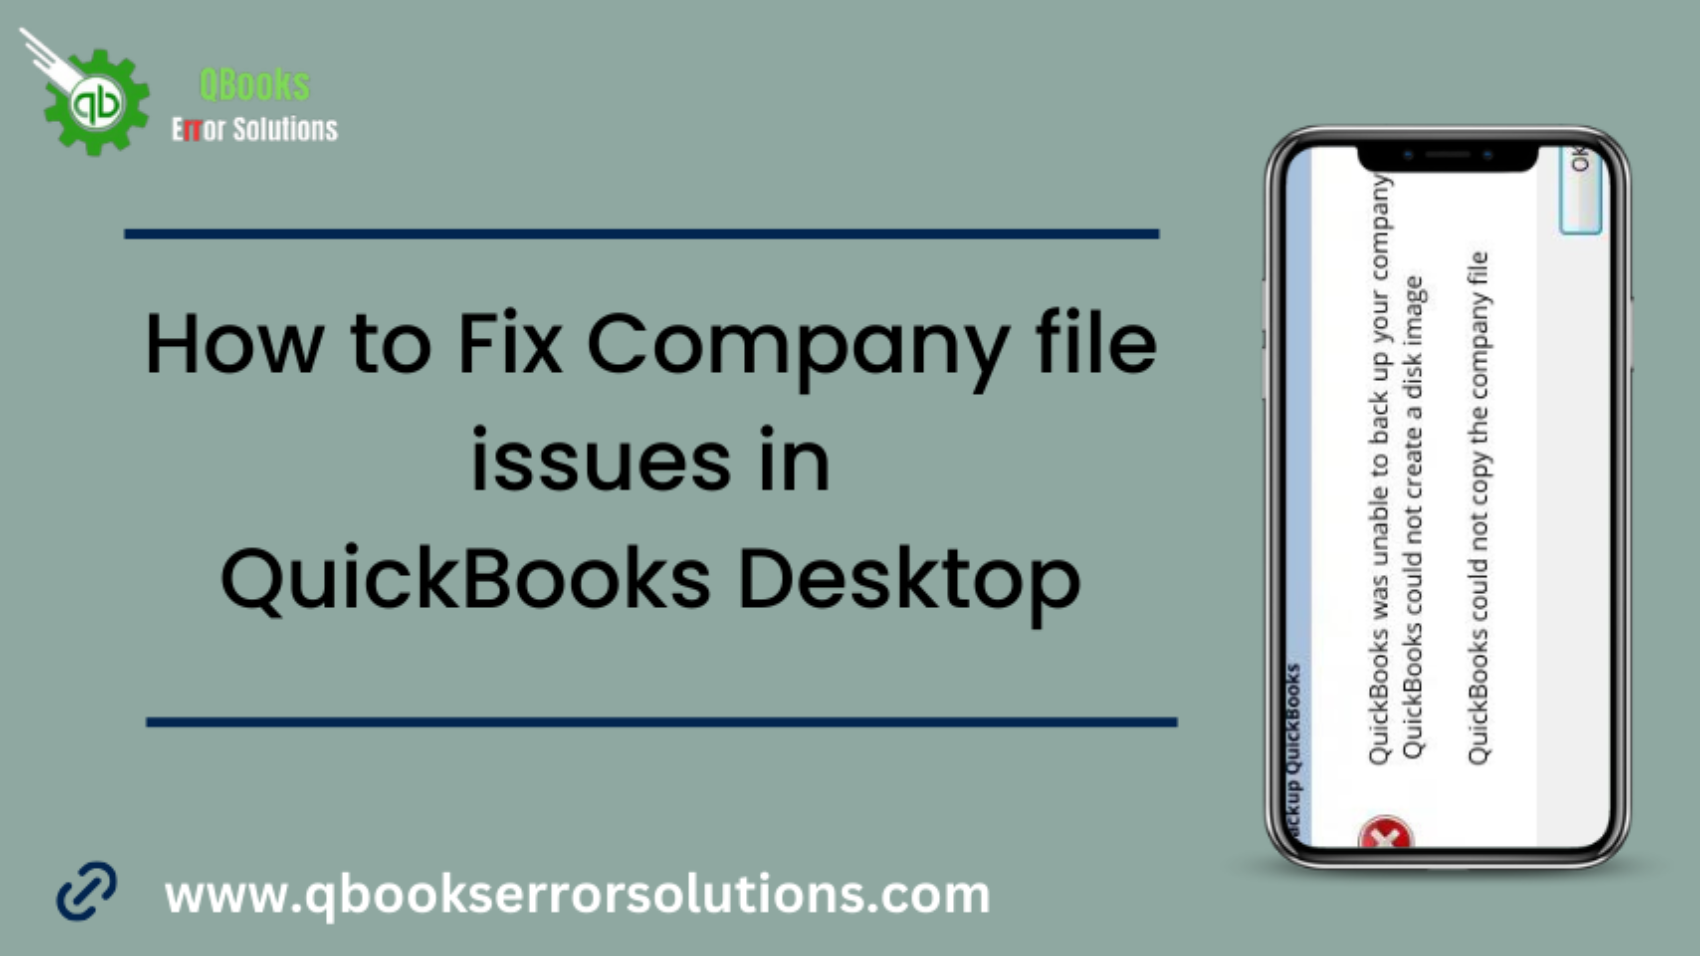 How to Fix Company Files Issues in QuickBooks Desktop